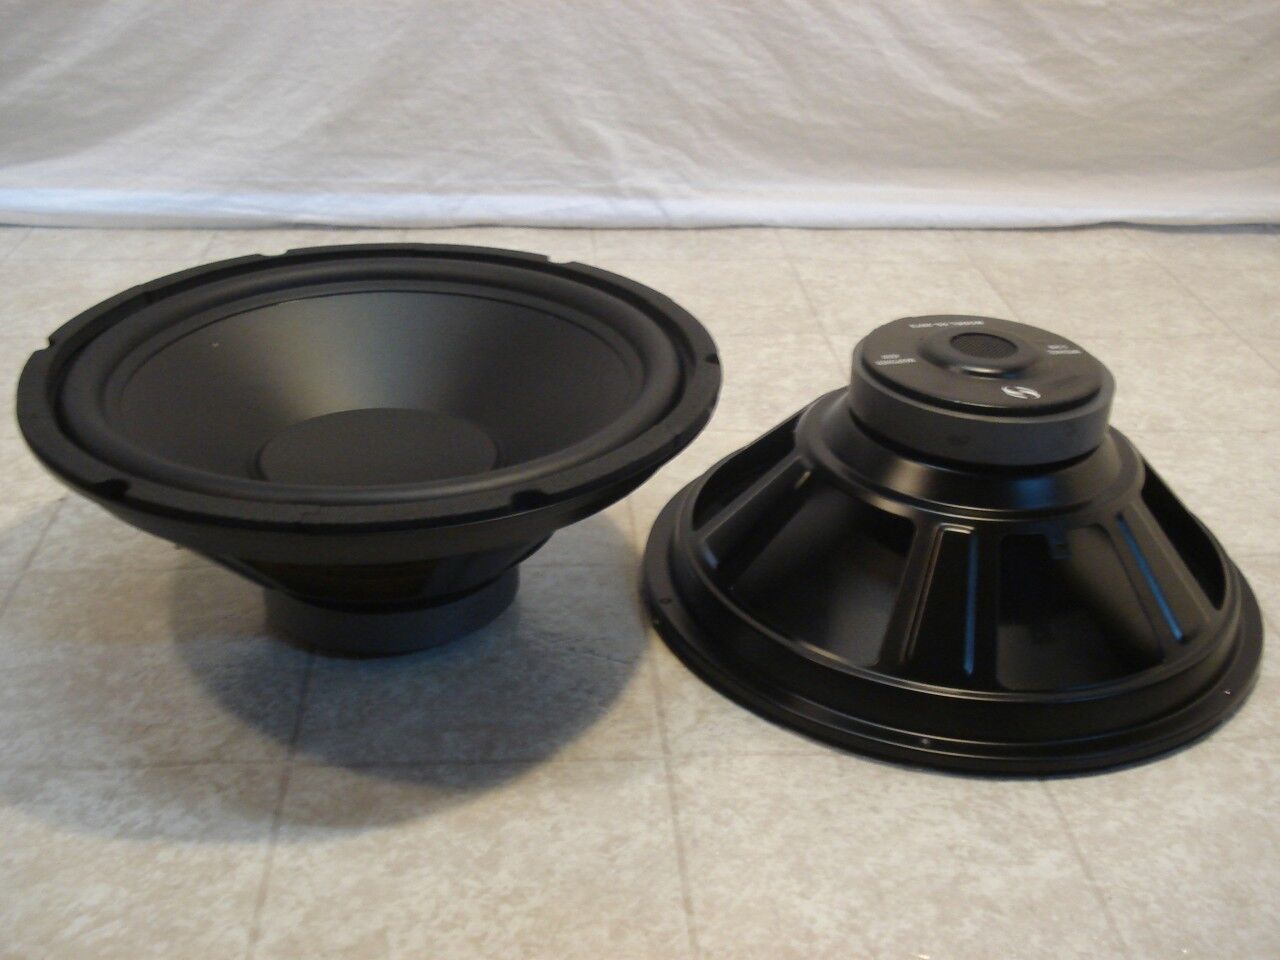 NEW (2) 12" Subwoofers Replacement Speakers.4 ohm.twelve inch Woofer pair.Audio audioselect 12inch.4ohm.bass altavoz.12in